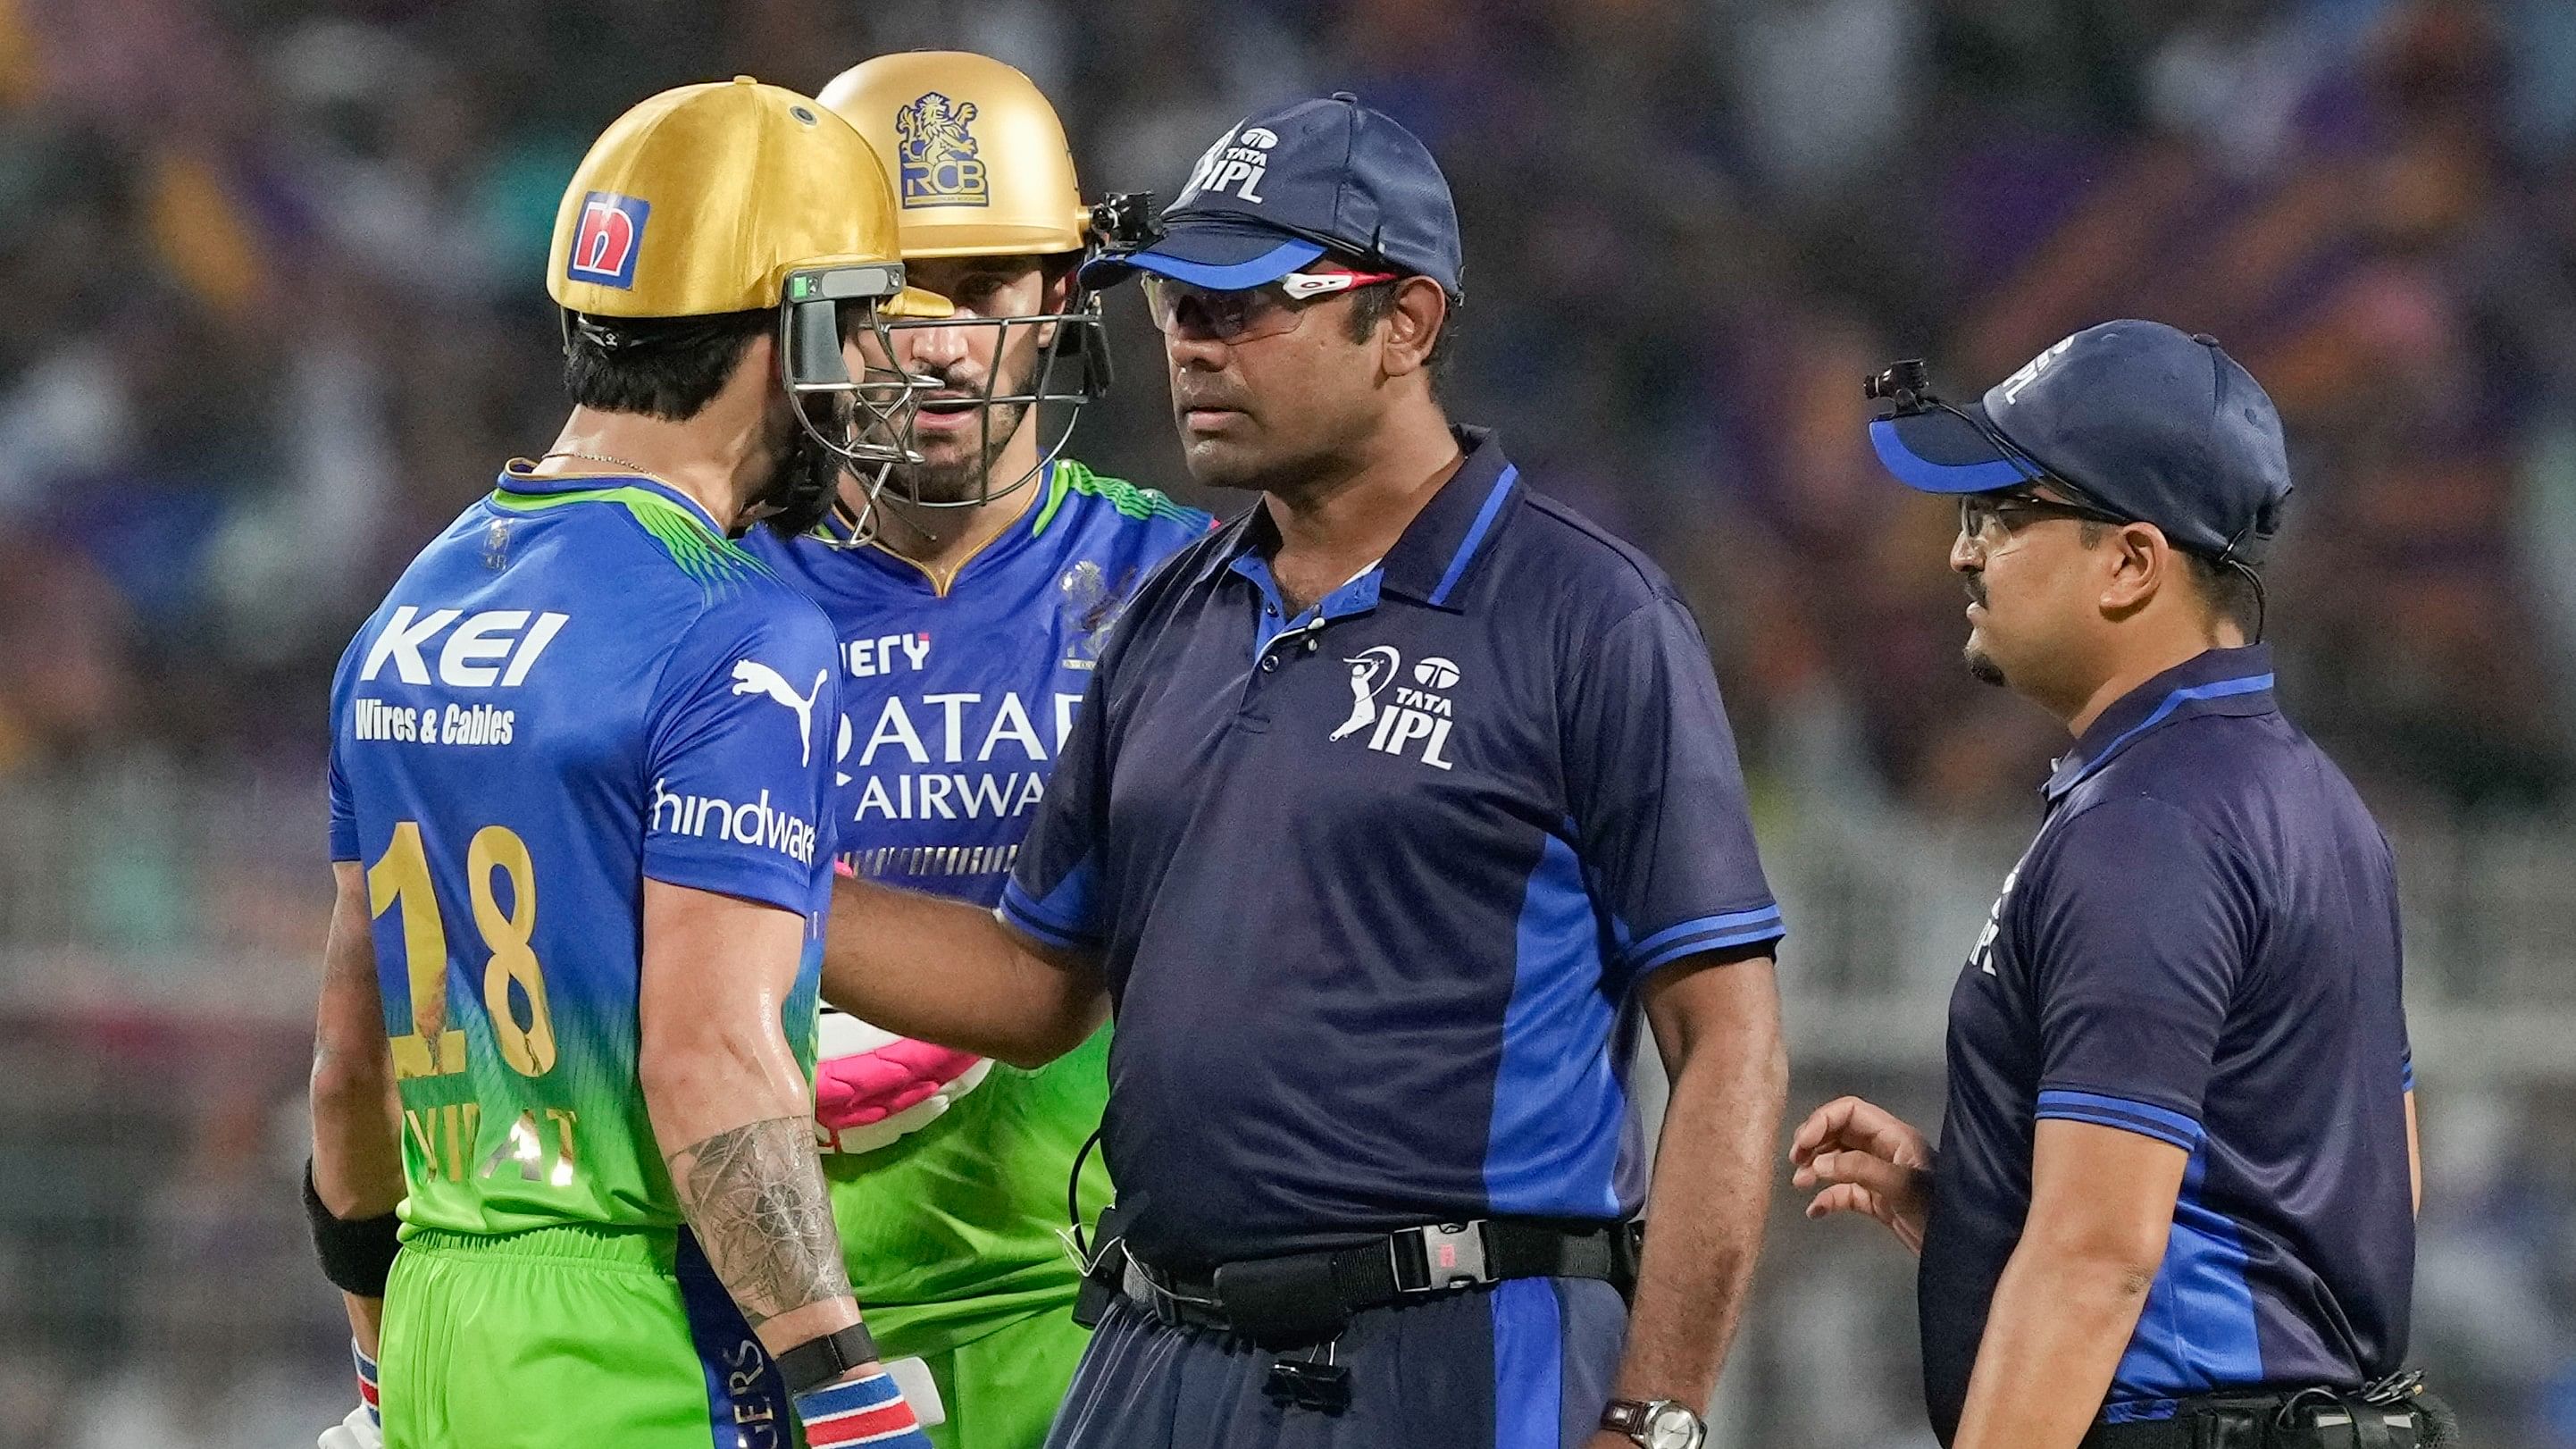 <div class="paragraphs"><p>Royal Challengers Bengaluru's Virat Kohli with captain Faf du Plessis interacts with the Umpires after he was caught and bowled during IPL T20 cricket match between at the Eden Gardens, in Kolkata, on Sunday</p></div>